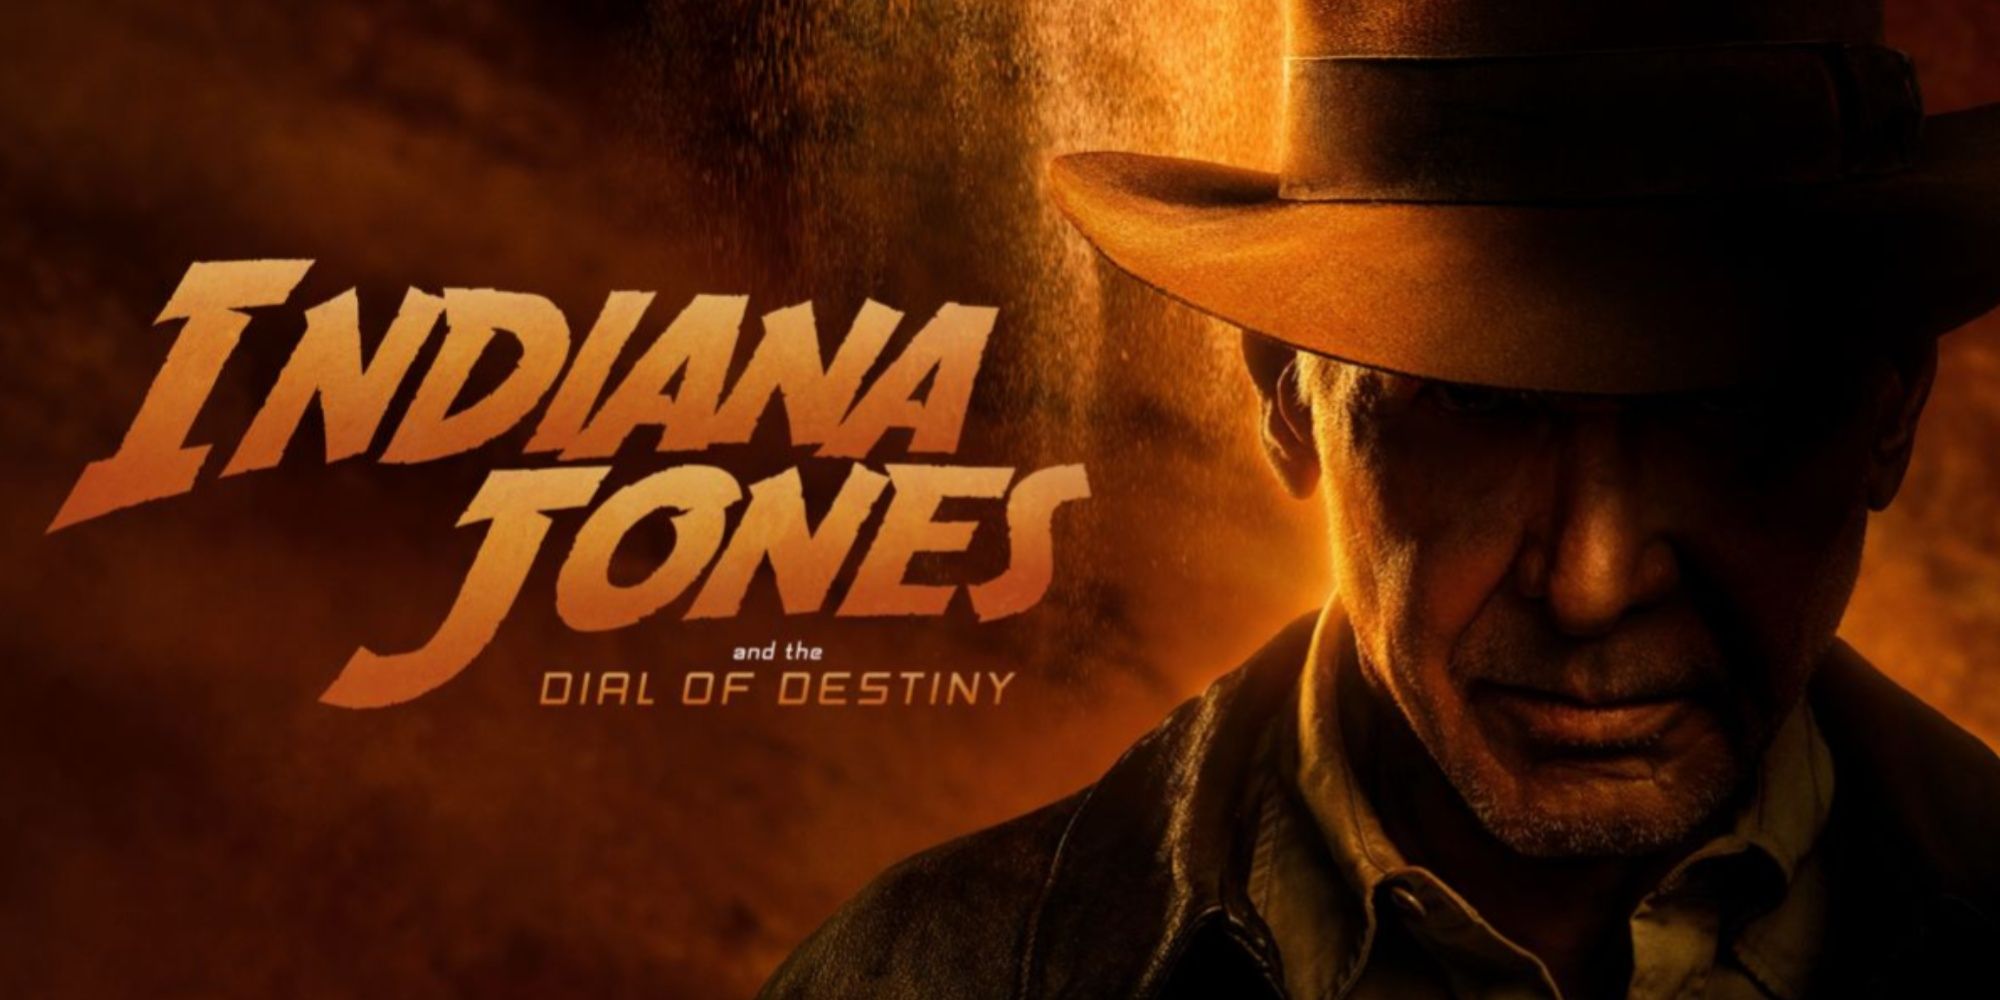 How To Watch The Indiana Jones Films In Chronological Order